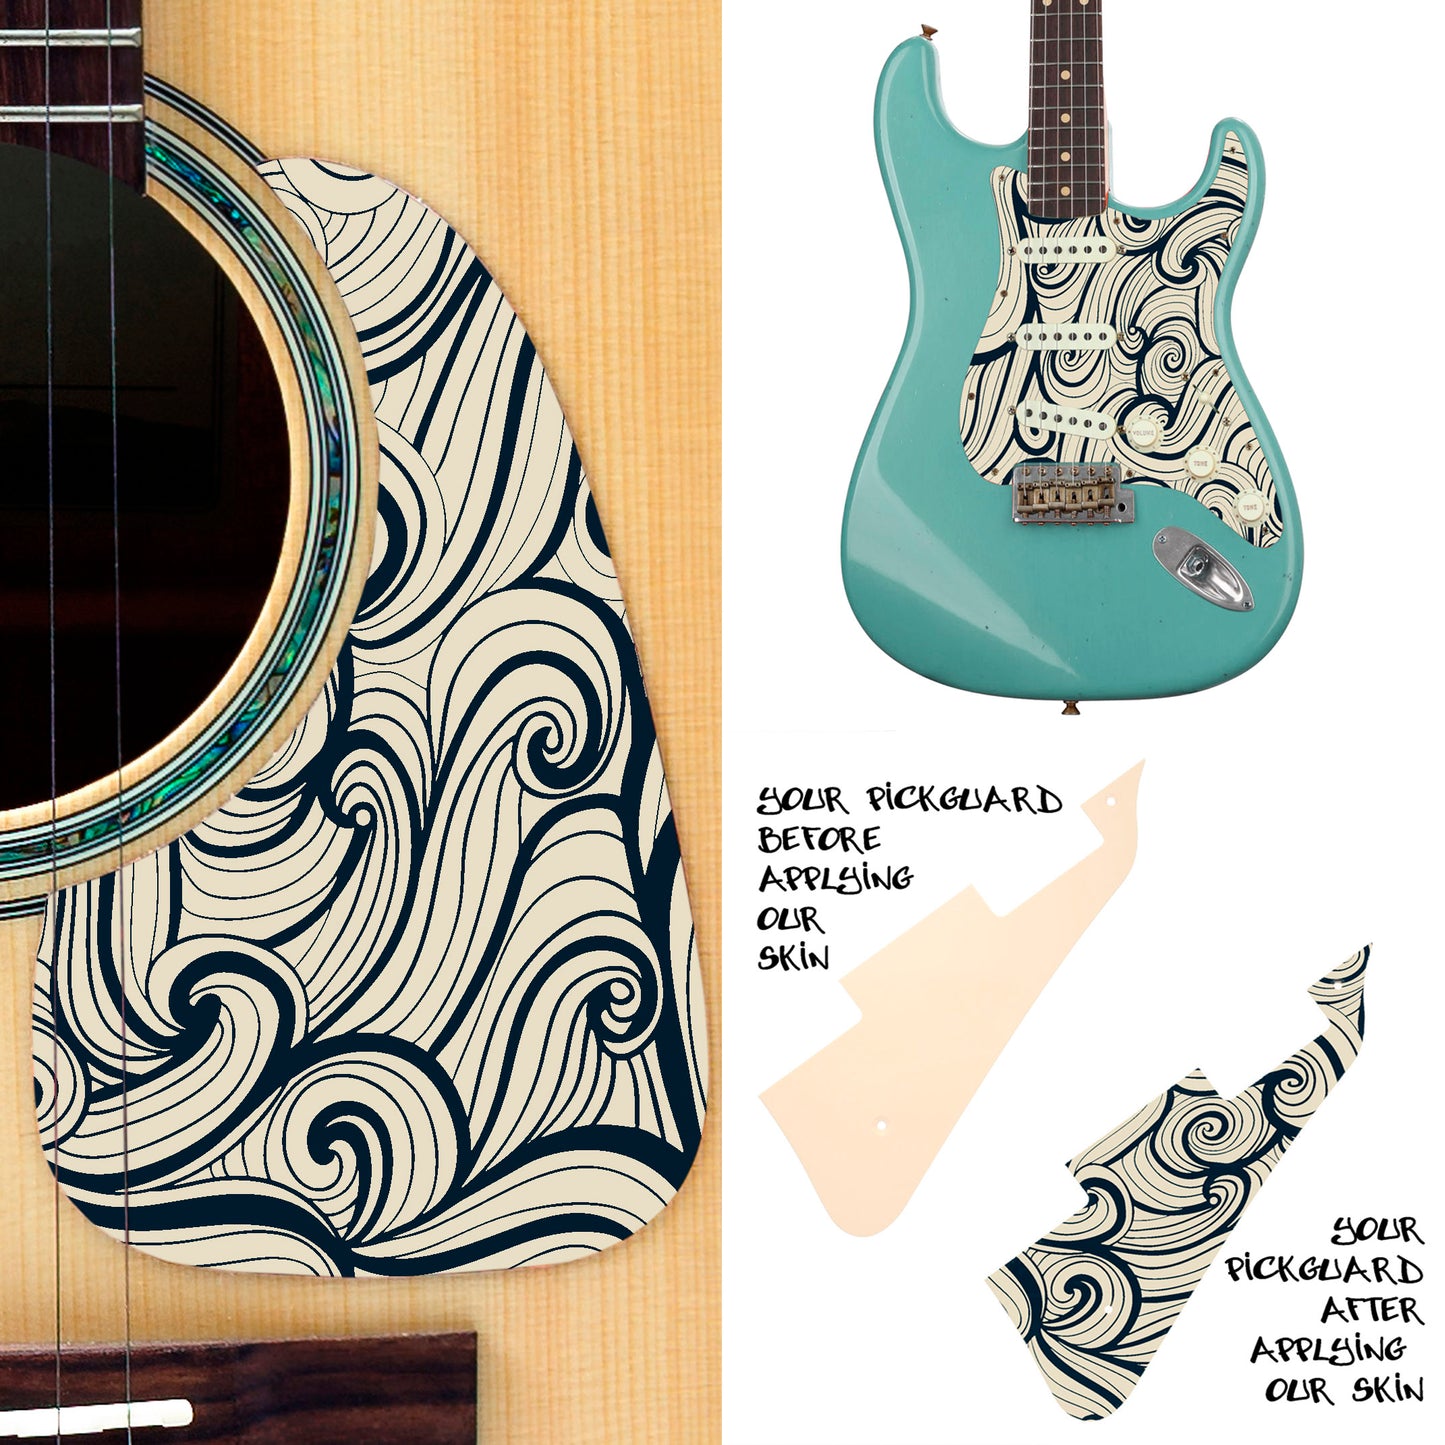 Guitar Custom PickGuard Sticker Skins. Customise your own existing Pickguard, Headstock, Tremolo Cover plate. The Swirls PK11